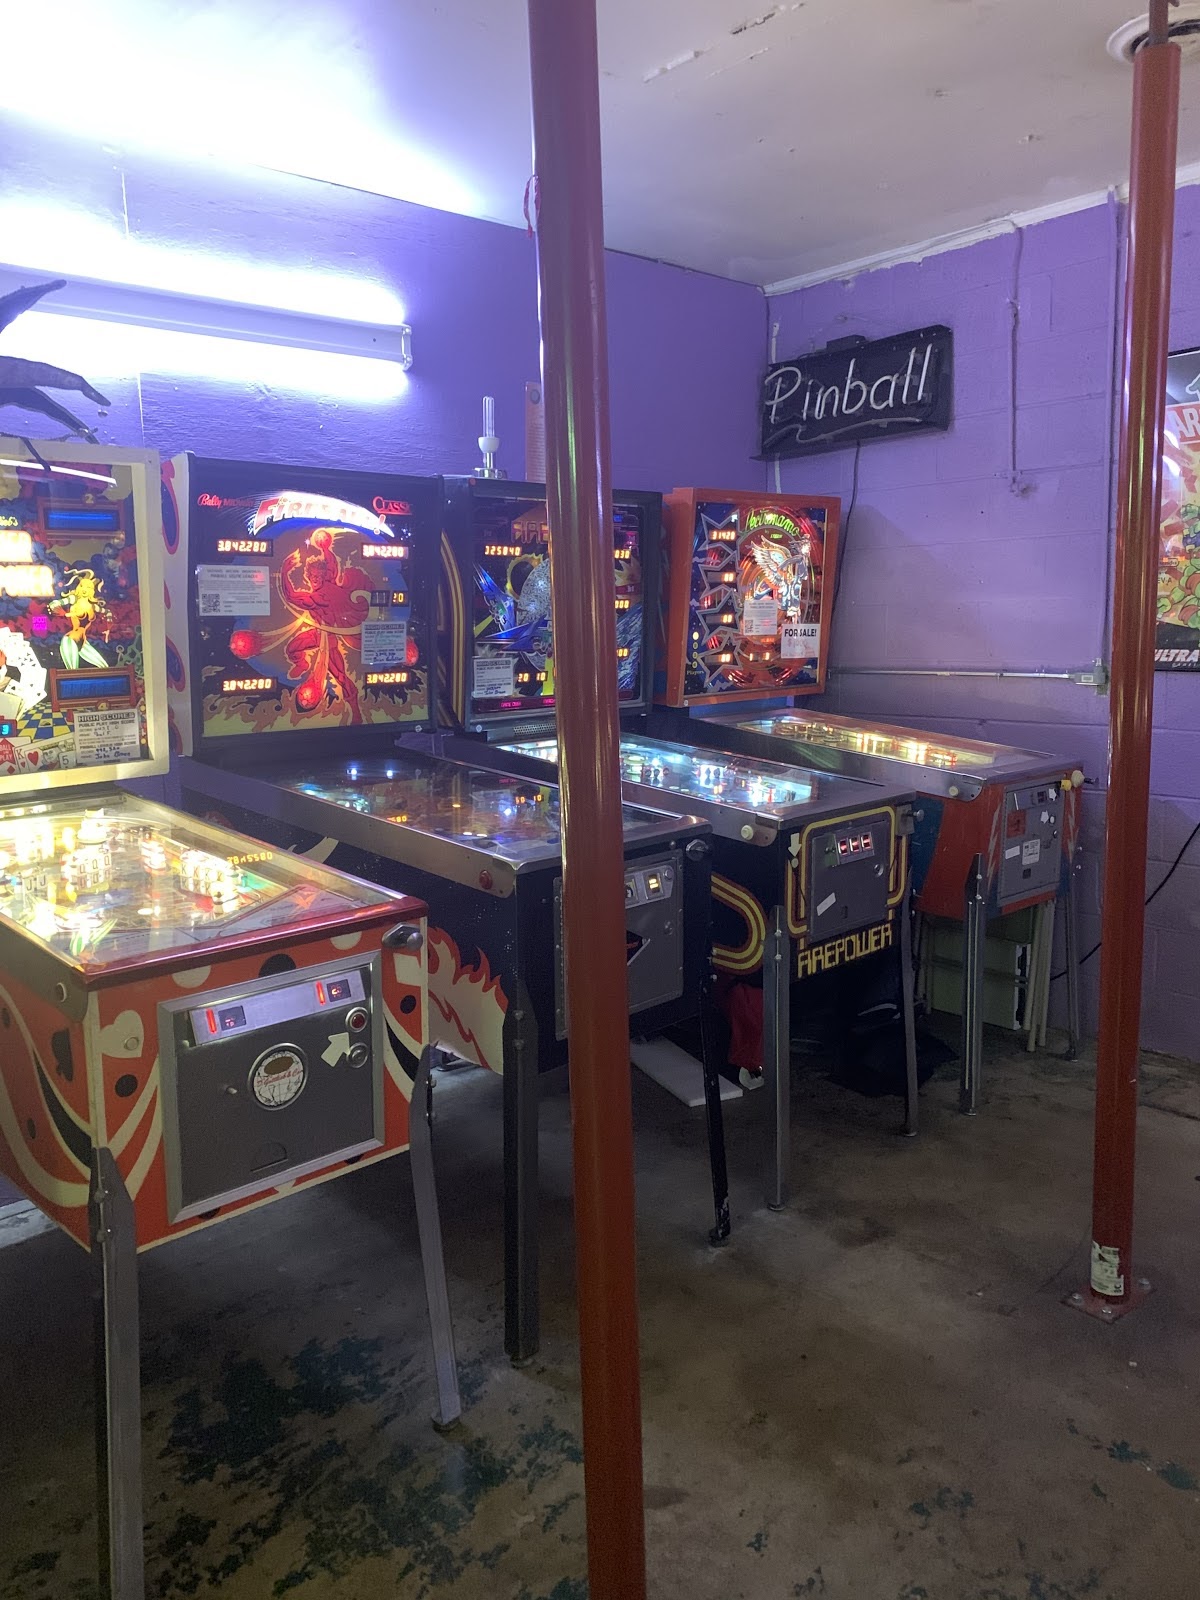 A row of colorful pinball machines sit side by side in a room with a concrete floor and purple walls